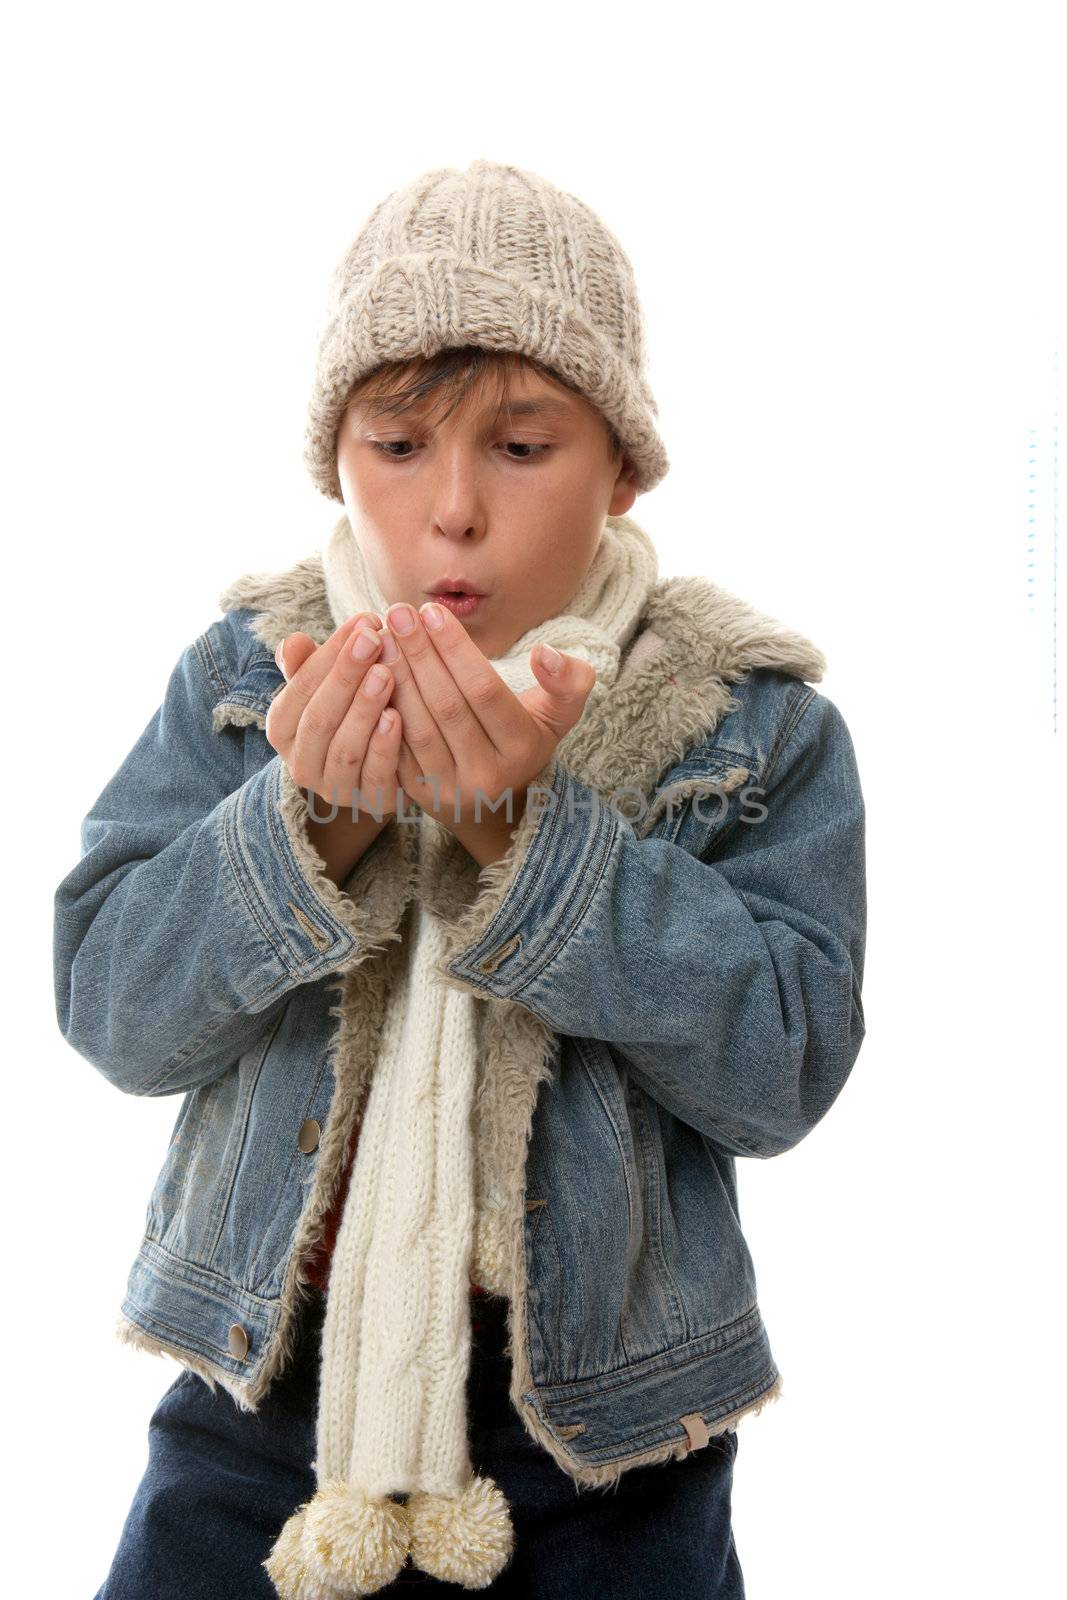 Child blowing on hands to warm them up.